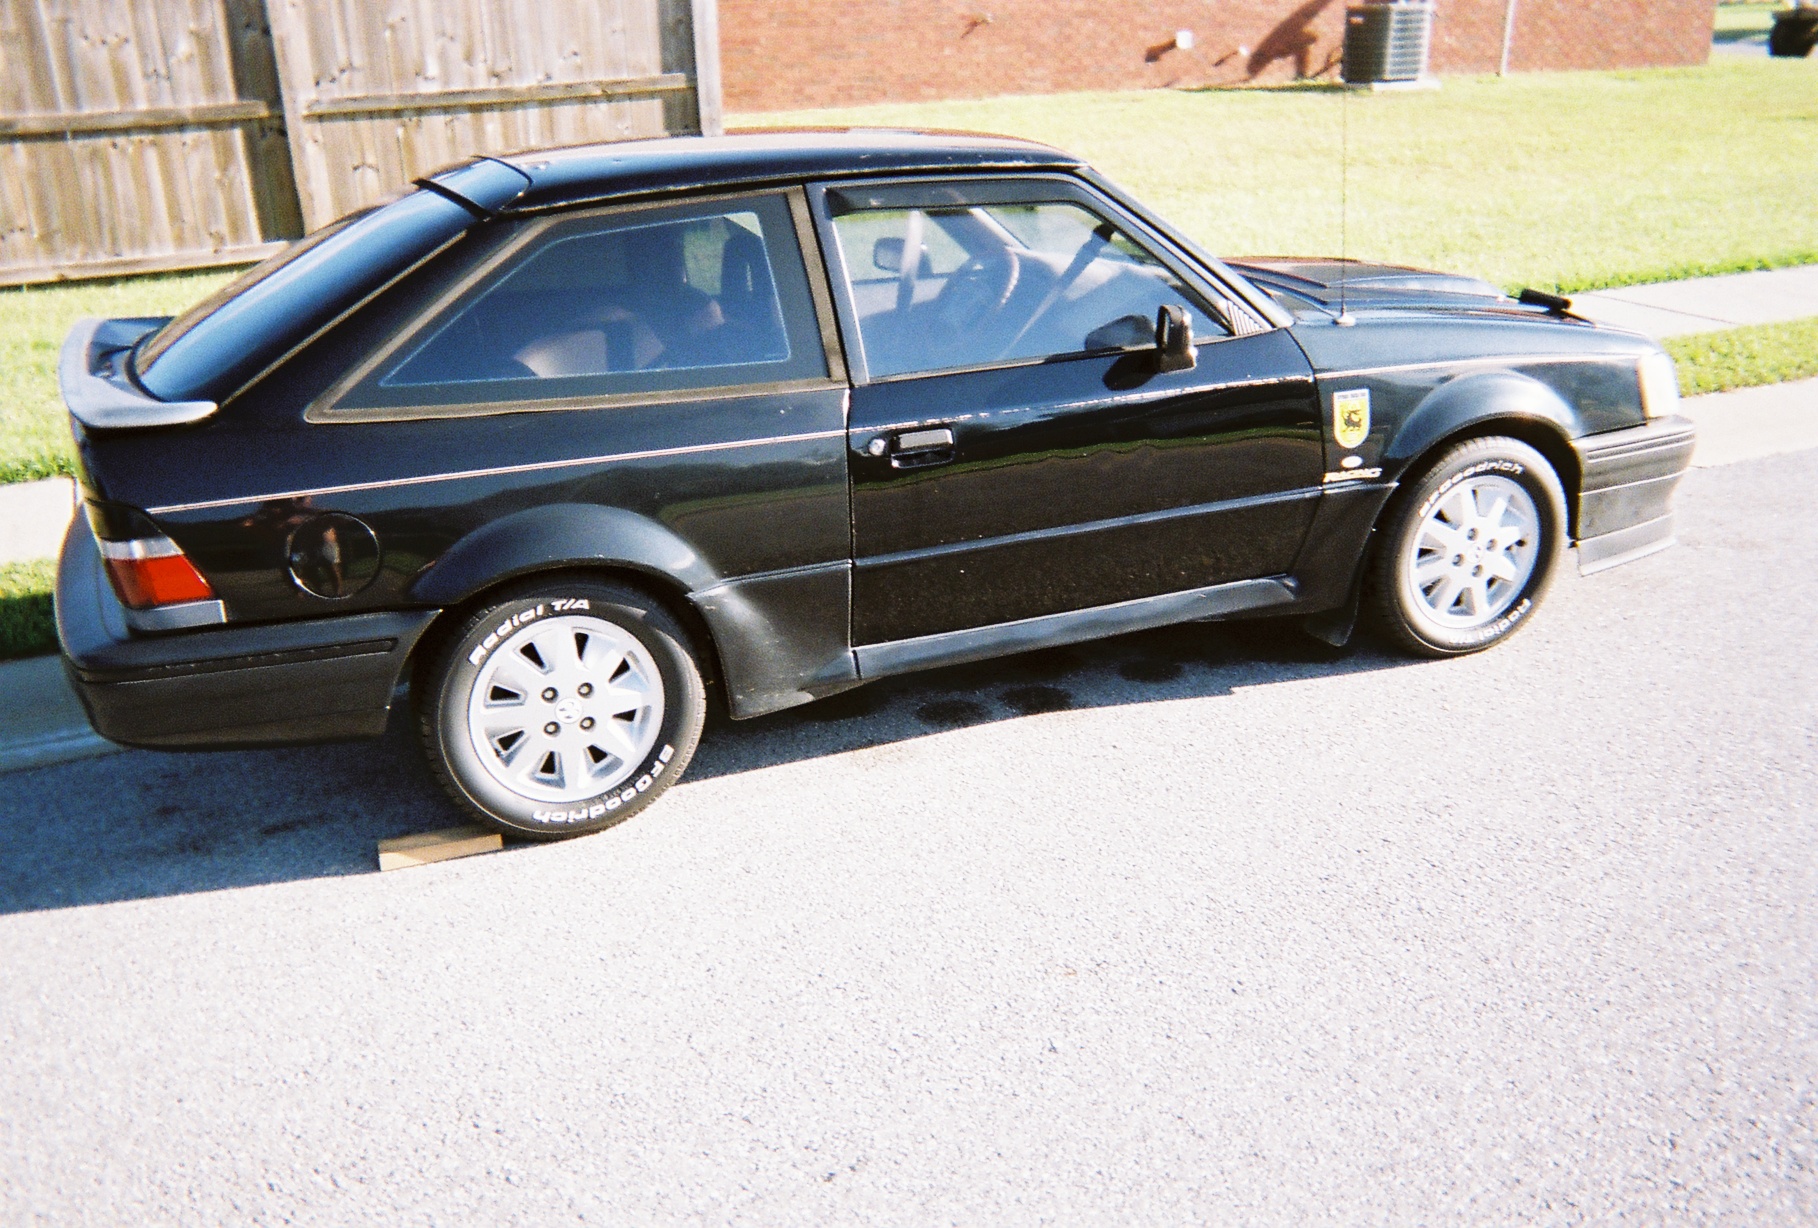 1989 ESCORT GT - The Mustang Source - Ford Mustang Forums